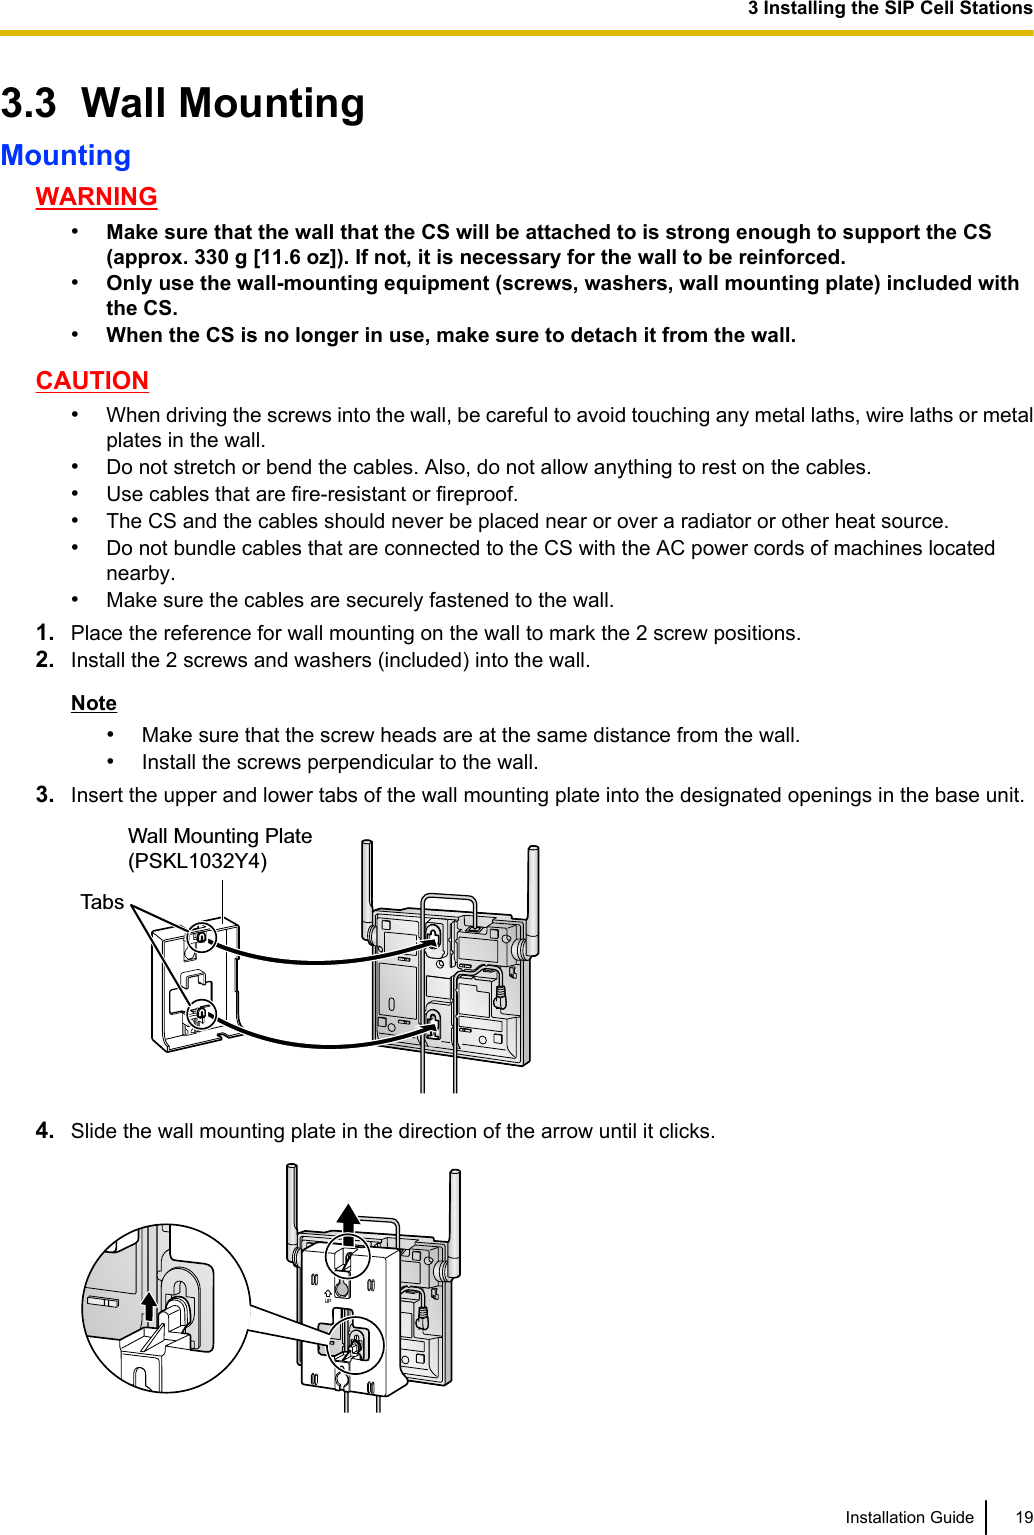 3.3  Wall MountingMountingWARNING•Make sure that the wall that the CS will be attached to is strong enough to support the CS(approx. 330 g [11.6 oz]). If not, it is necessary for the wall to be reinforced.•Only use the wall-mounting equipment (screws, washers, wall mounting plate) included withthe CS.•When the CS is no longer in use, make sure to detach it from the wall.CAUTION•When driving the screws into the wall, be careful to avoid touching any metal laths, wire laths or metalplates in the wall.•Do not stretch or bend the cables. Also, do not allow anything to rest on the cables.•Use cables that are fire-resistant or fireproof.•The CS and the cables should never be placed near or over a radiator or other heat source.•Do not bundle cables that are connected to the CS with the AC power cords of machines locatednearby.•Make sure the cables are securely fastened to the wall.1. Place the reference for wall mounting on the wall to mark the 2 screw positions.2. Install the 2 screws and washers (included) into the wall.Note•Make sure that the screw heads are at the same distance from the wall.•Install the screws perpendicular to the wall.3. Insert the upper and lower tabs of the wall mounting plate into the designated openings in the base unit.TabsWall Mounting Plate (PSKL1032Y4)4. Slide the wall mounting plate in the direction of the arrow until it clicks.Installation Guide 193 Installing the SIP Cell Stations